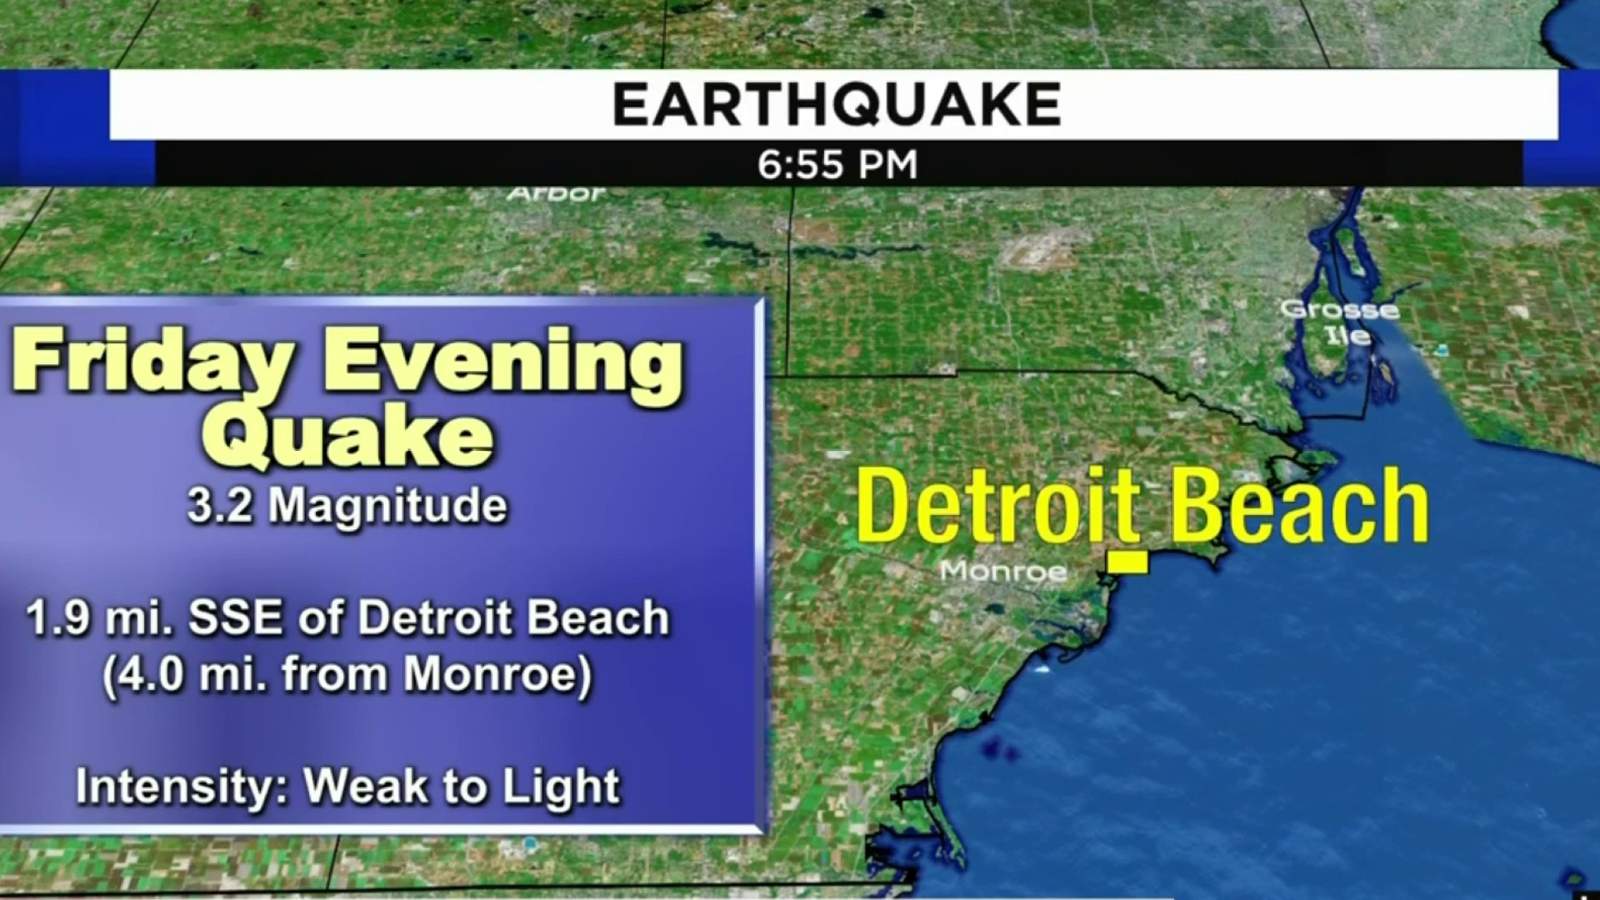 Earthquake in SE Michigan: Heres what people felt